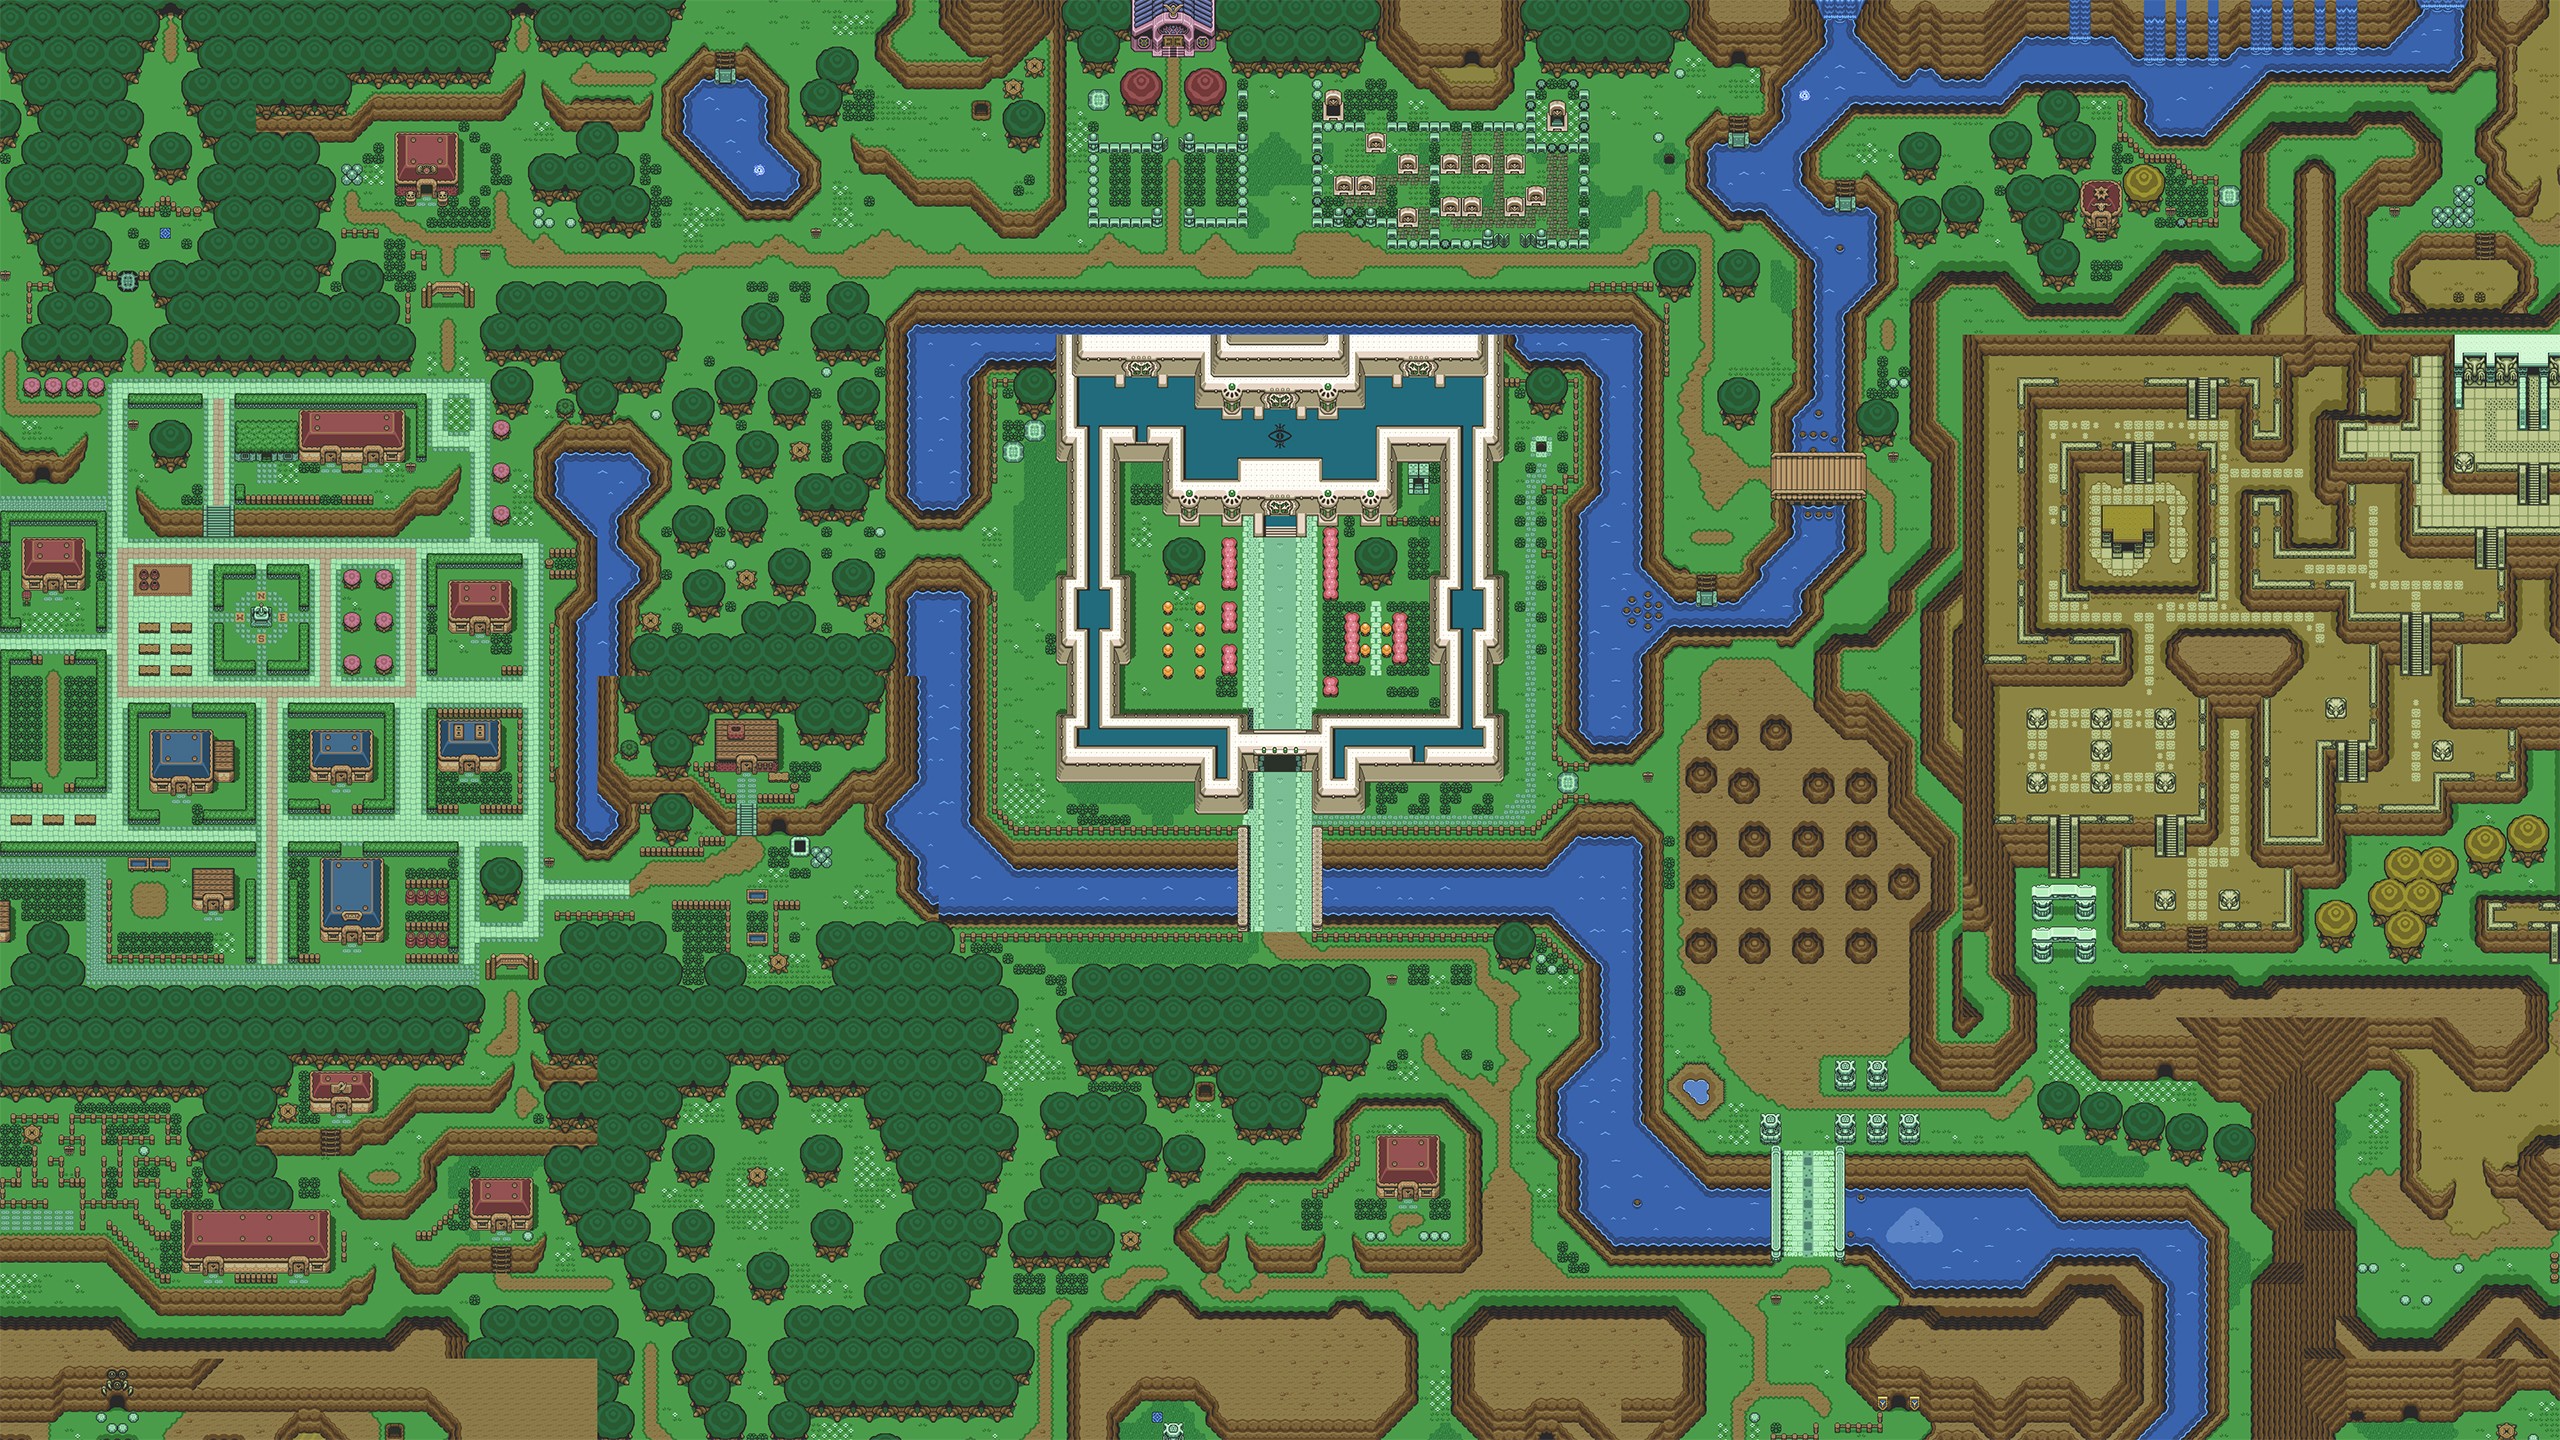 General 2560x1440 The Legend of Zelda: A Link to the Past map video games The Legend of Zelda retro games video game art